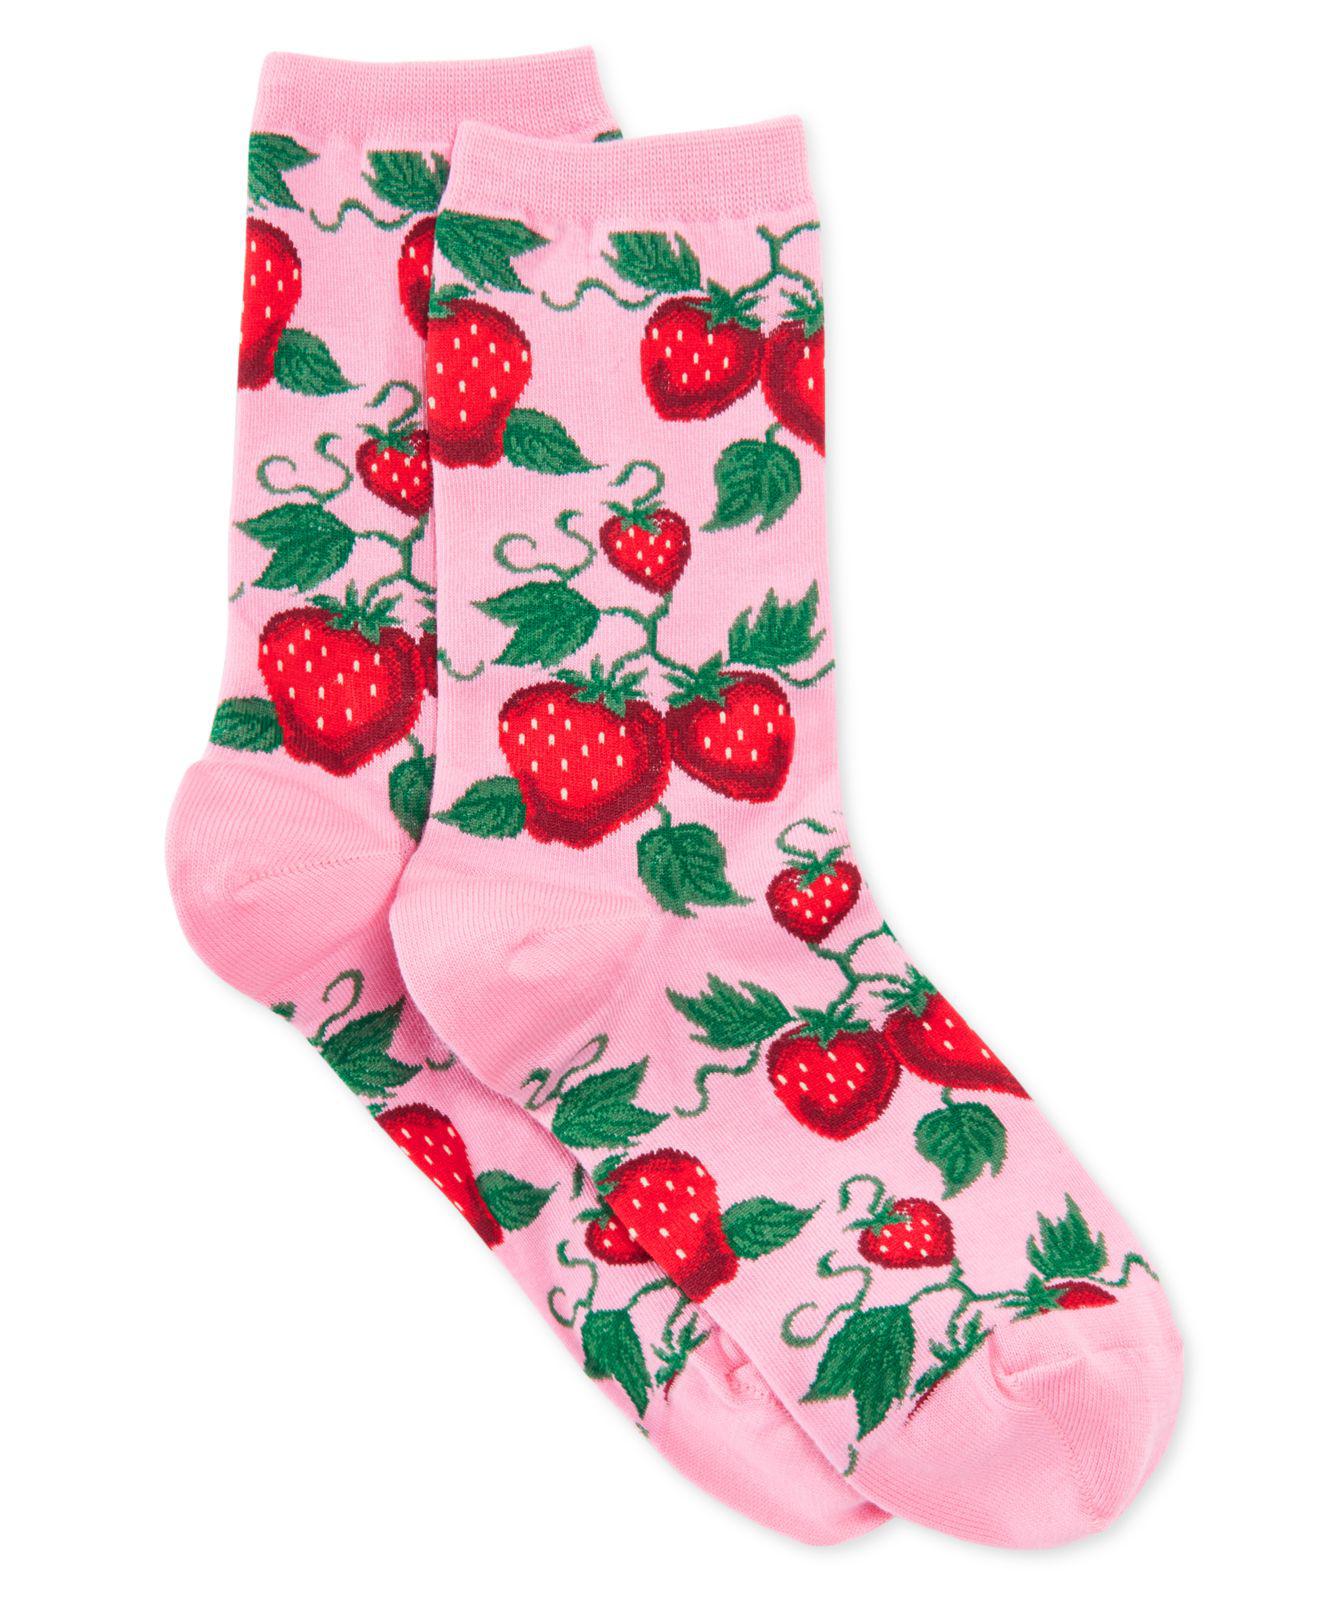 Hot Sox Cotton Strawberry Socks in Pink - Lyst